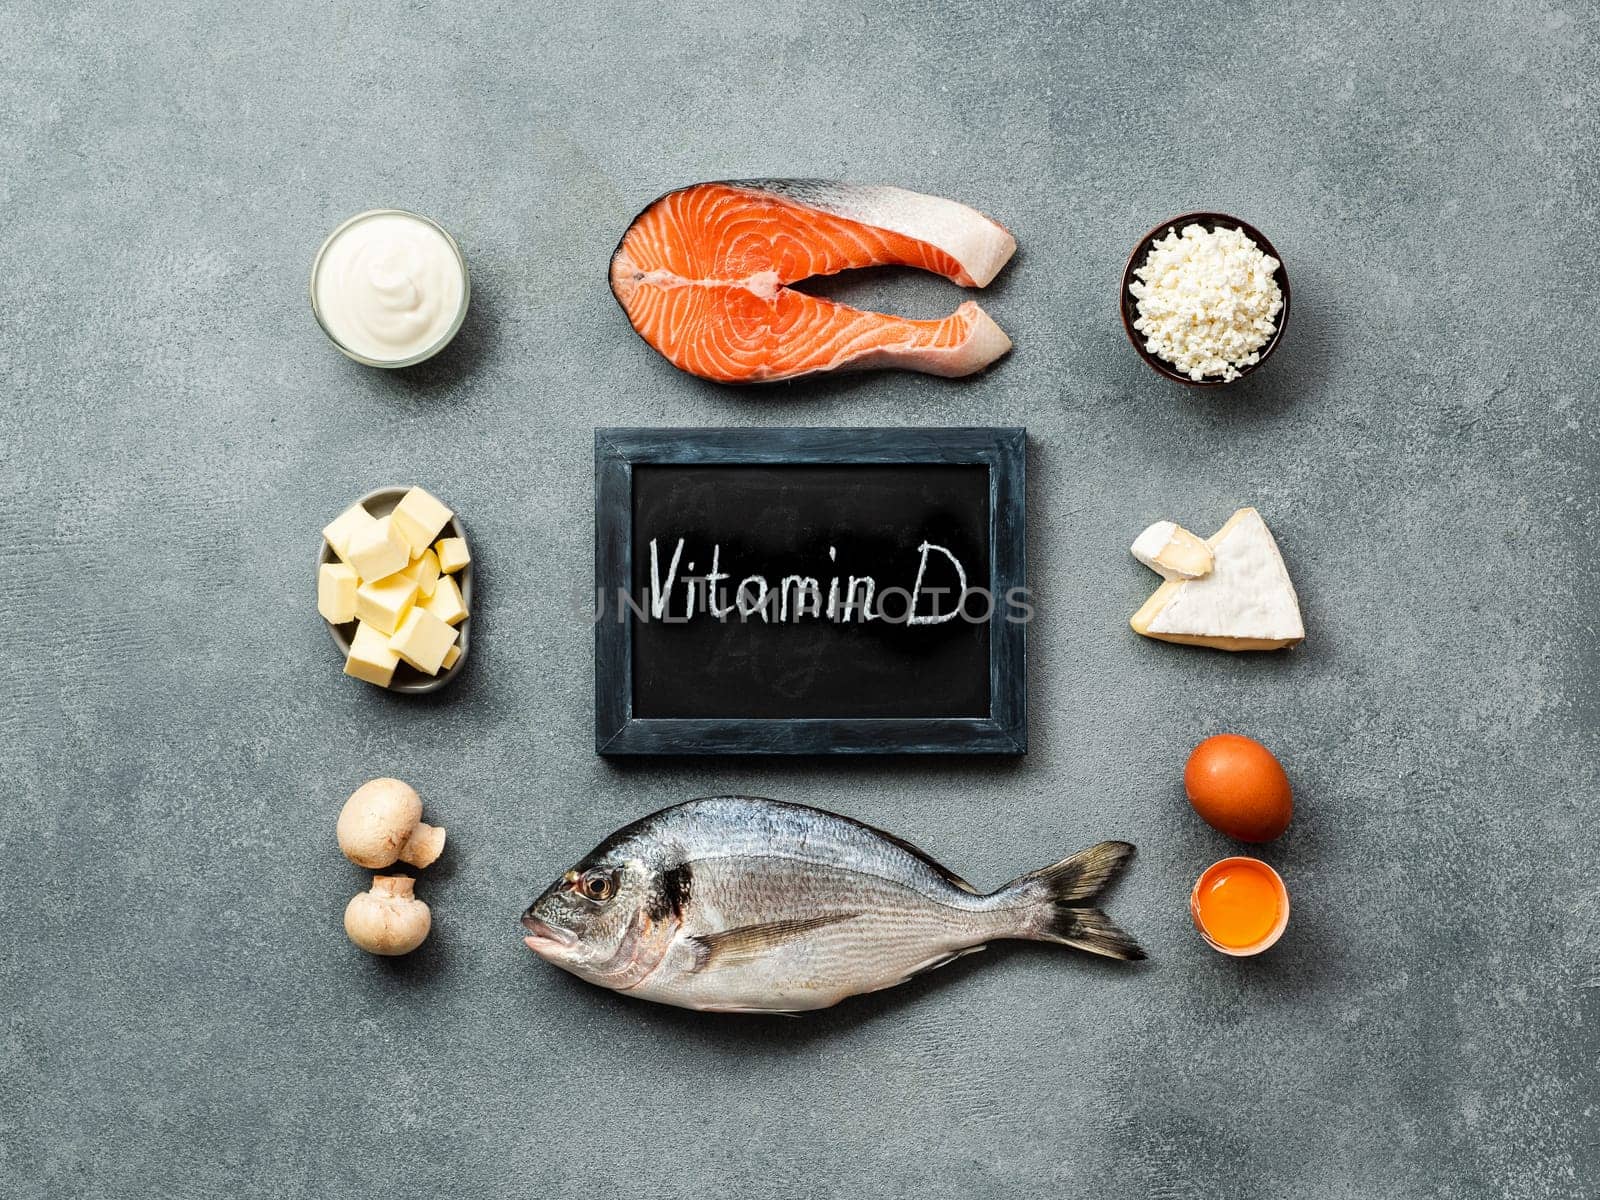 Vaitamin D sources concept. Fish, salmon, dairy products, eggs, mushrooms and chalkboard with Vitamin D words on gray stone background. Top view or flat lay.